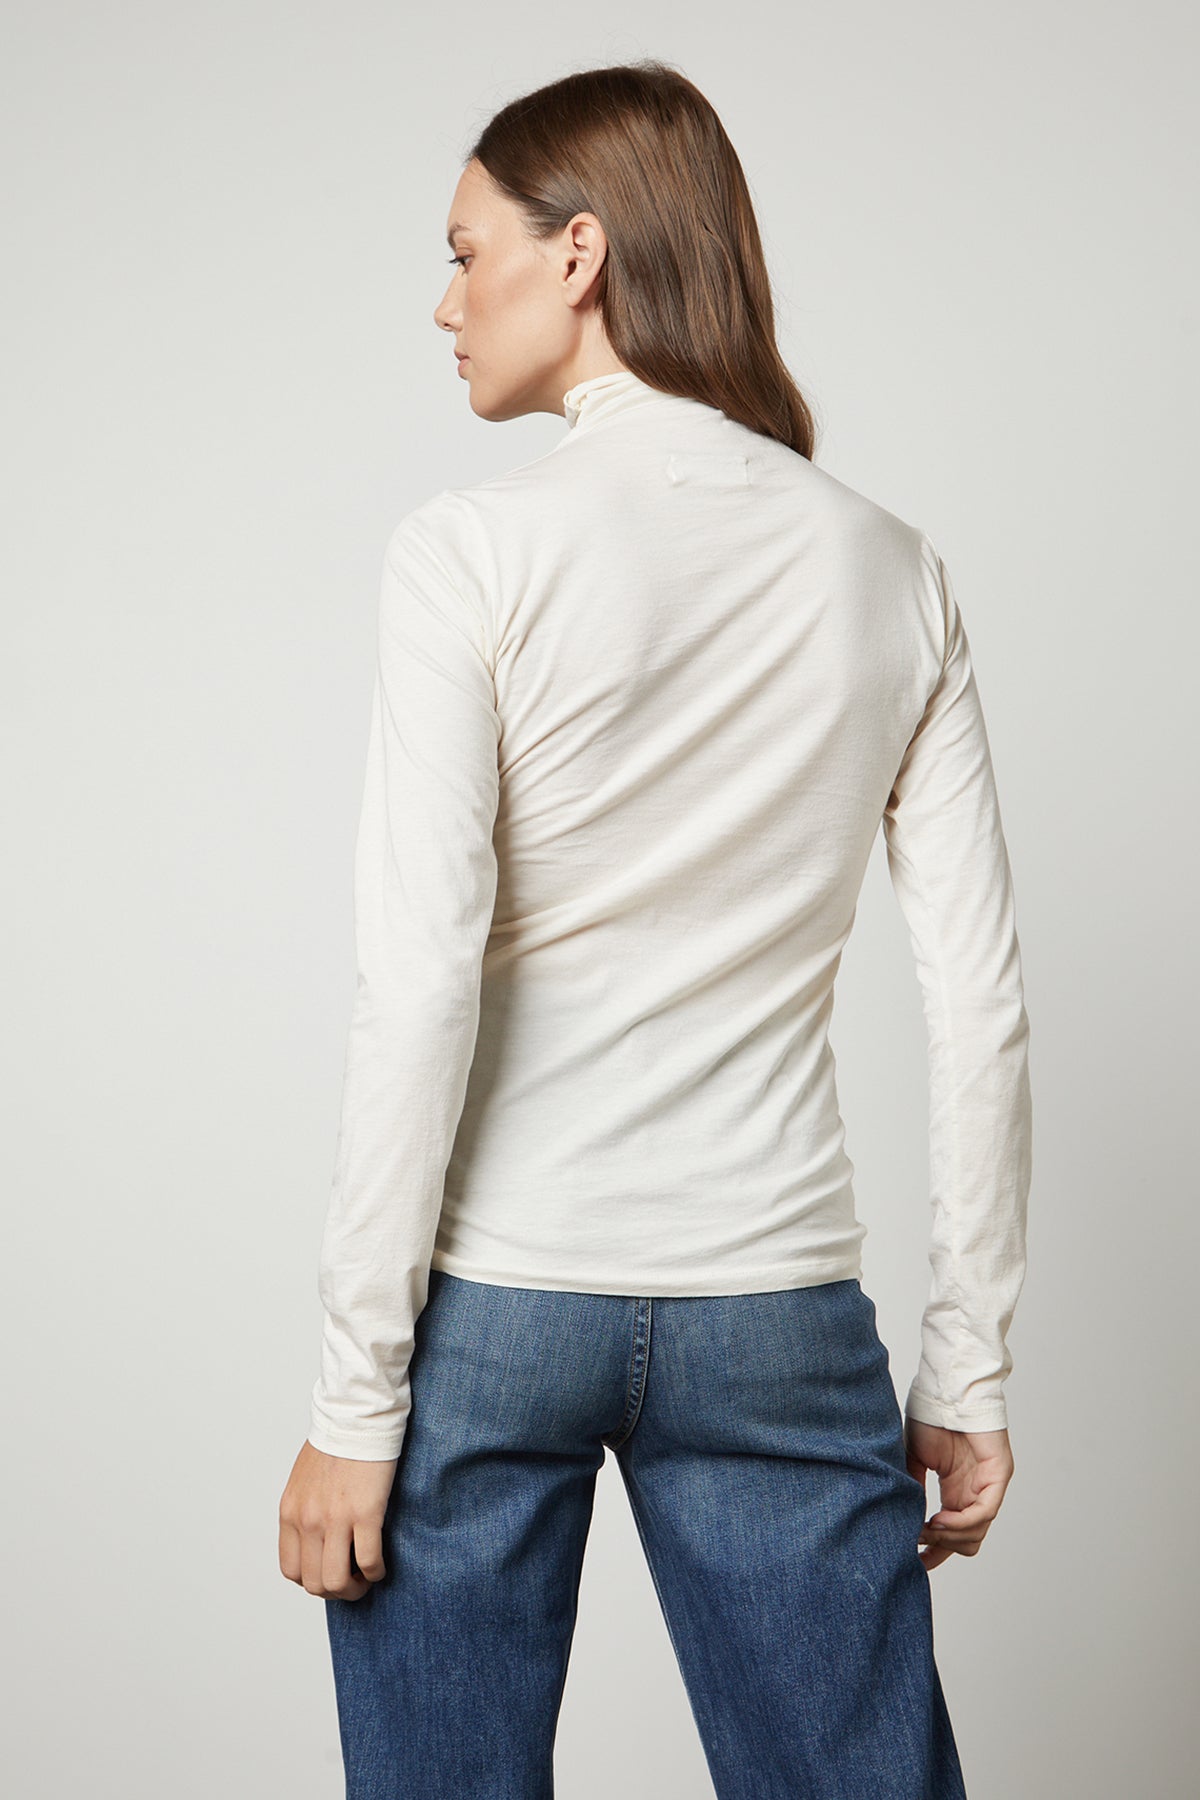 The back view of a woman flaunting a TALISIA GAUZY WHISPER FITTED MOCK NECK TEE by Velvet by Graham & Spencer and jeans, a wardrobe staple in the fashion world.-35230354178241